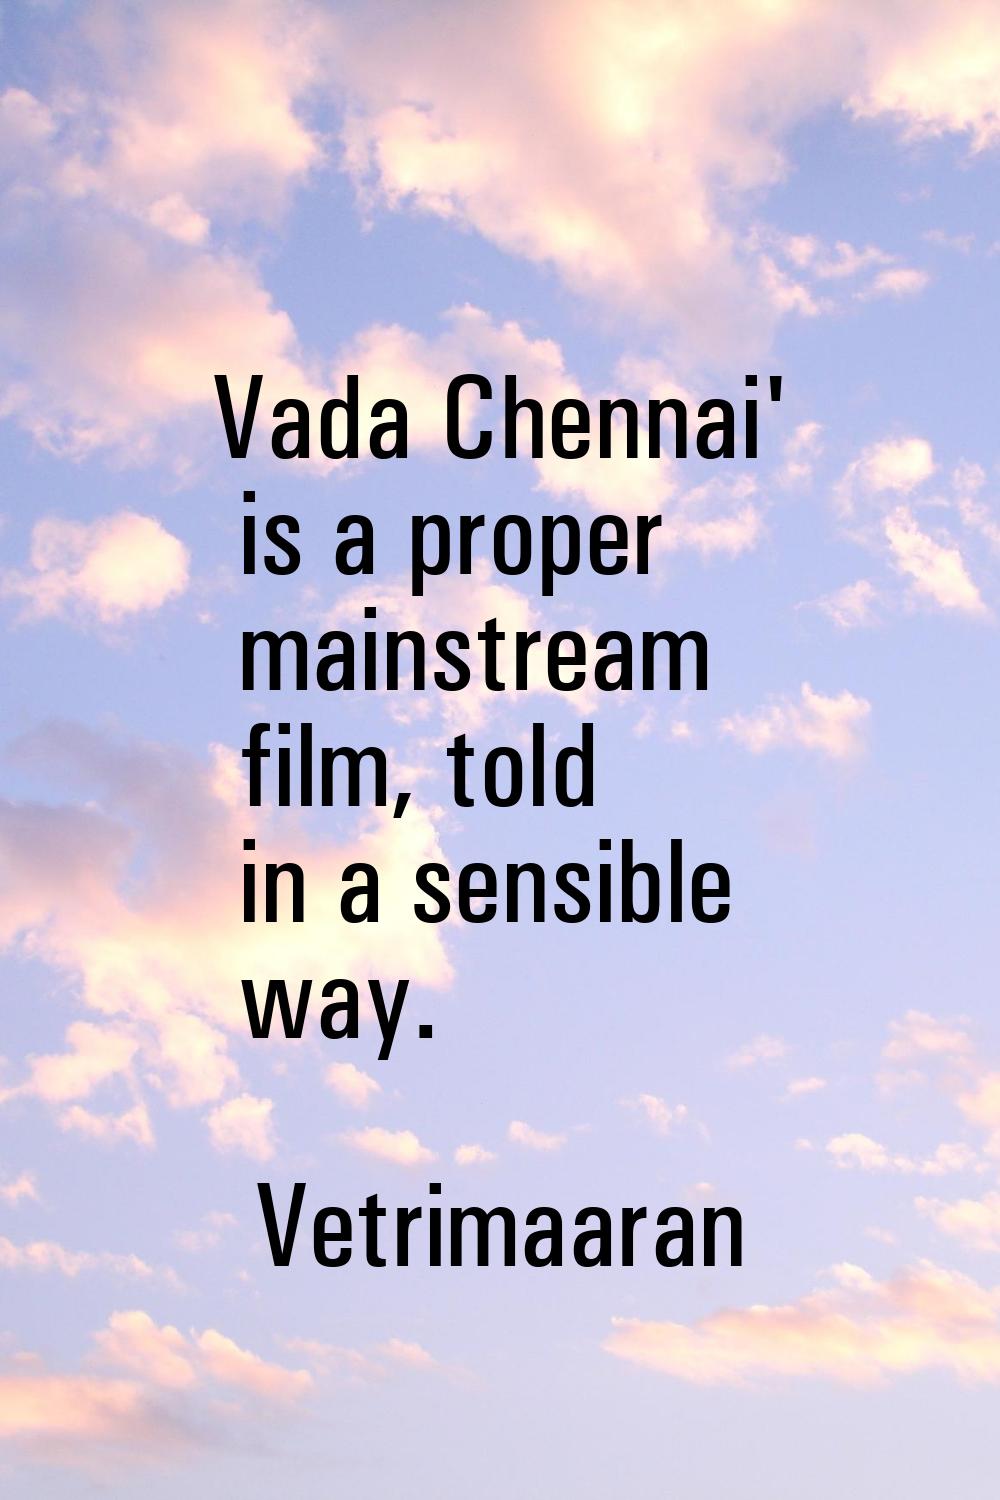 Vada Chennai' is a proper mainstream film, told in a sensible way.